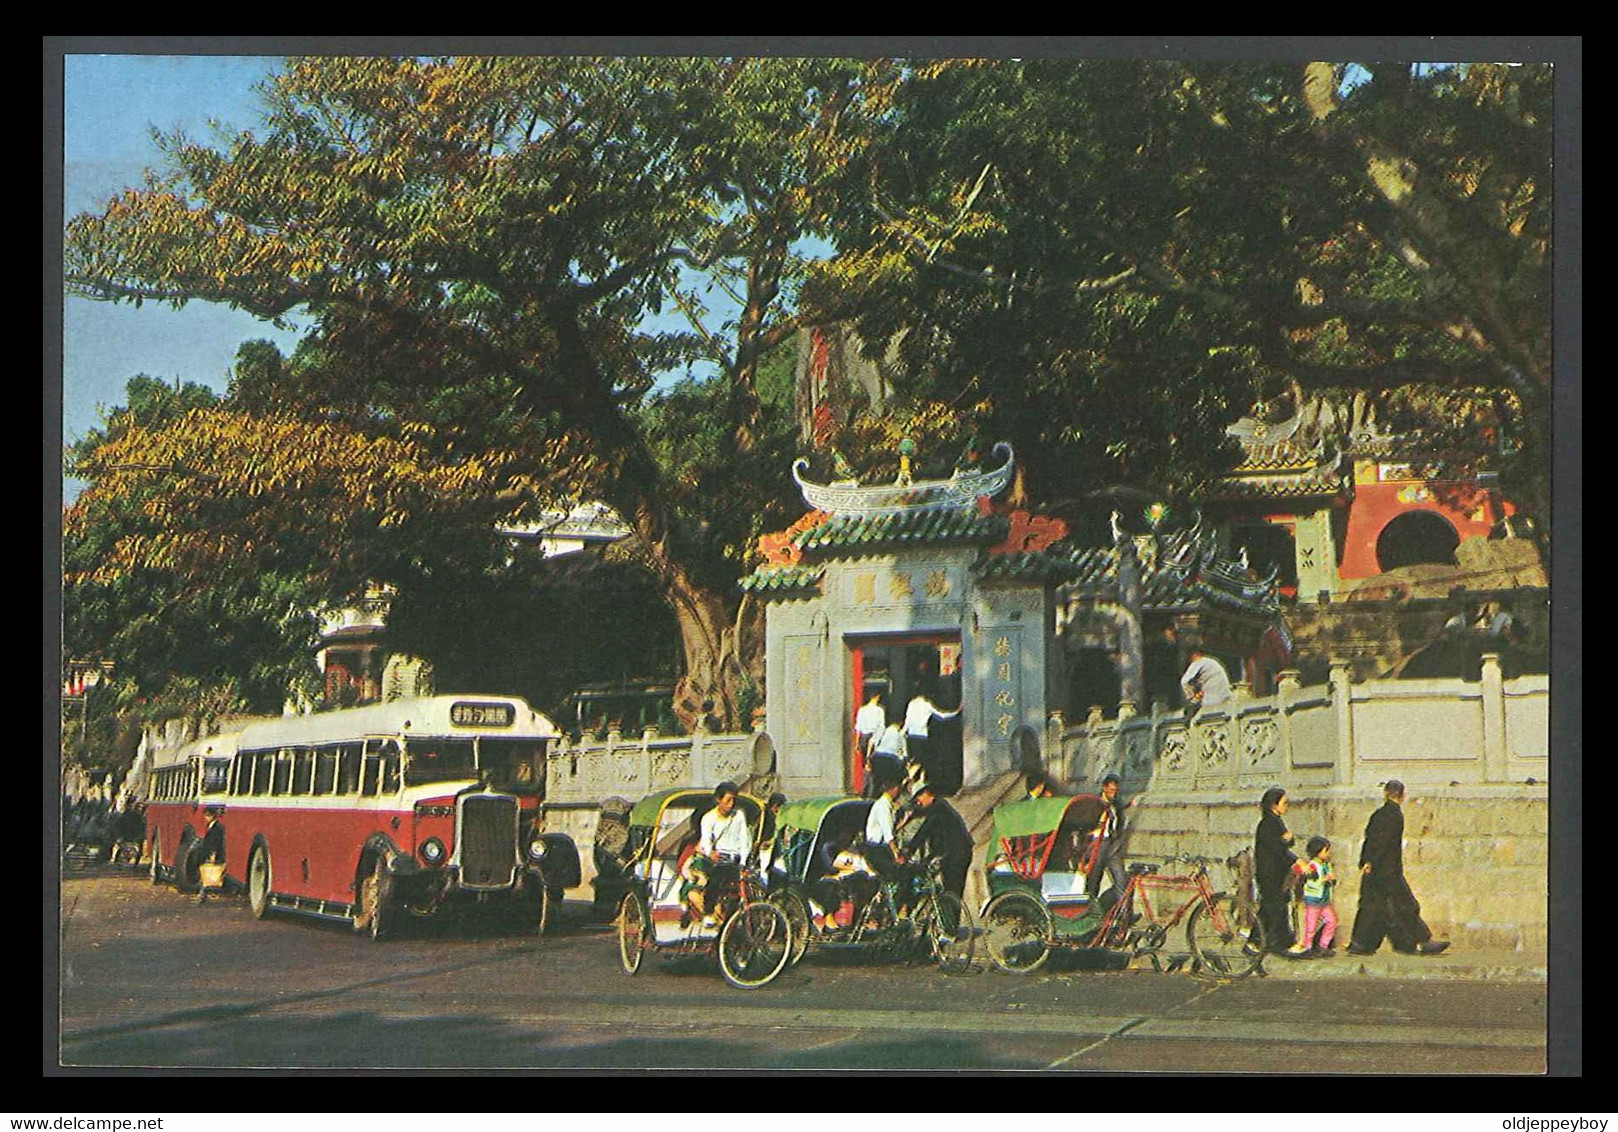 Postal Macau - Macao - Makok, Goddess Of Ama From Which The Name Macao Is Derived. Temple Of Fisherfolk - Bus - Autobus - China